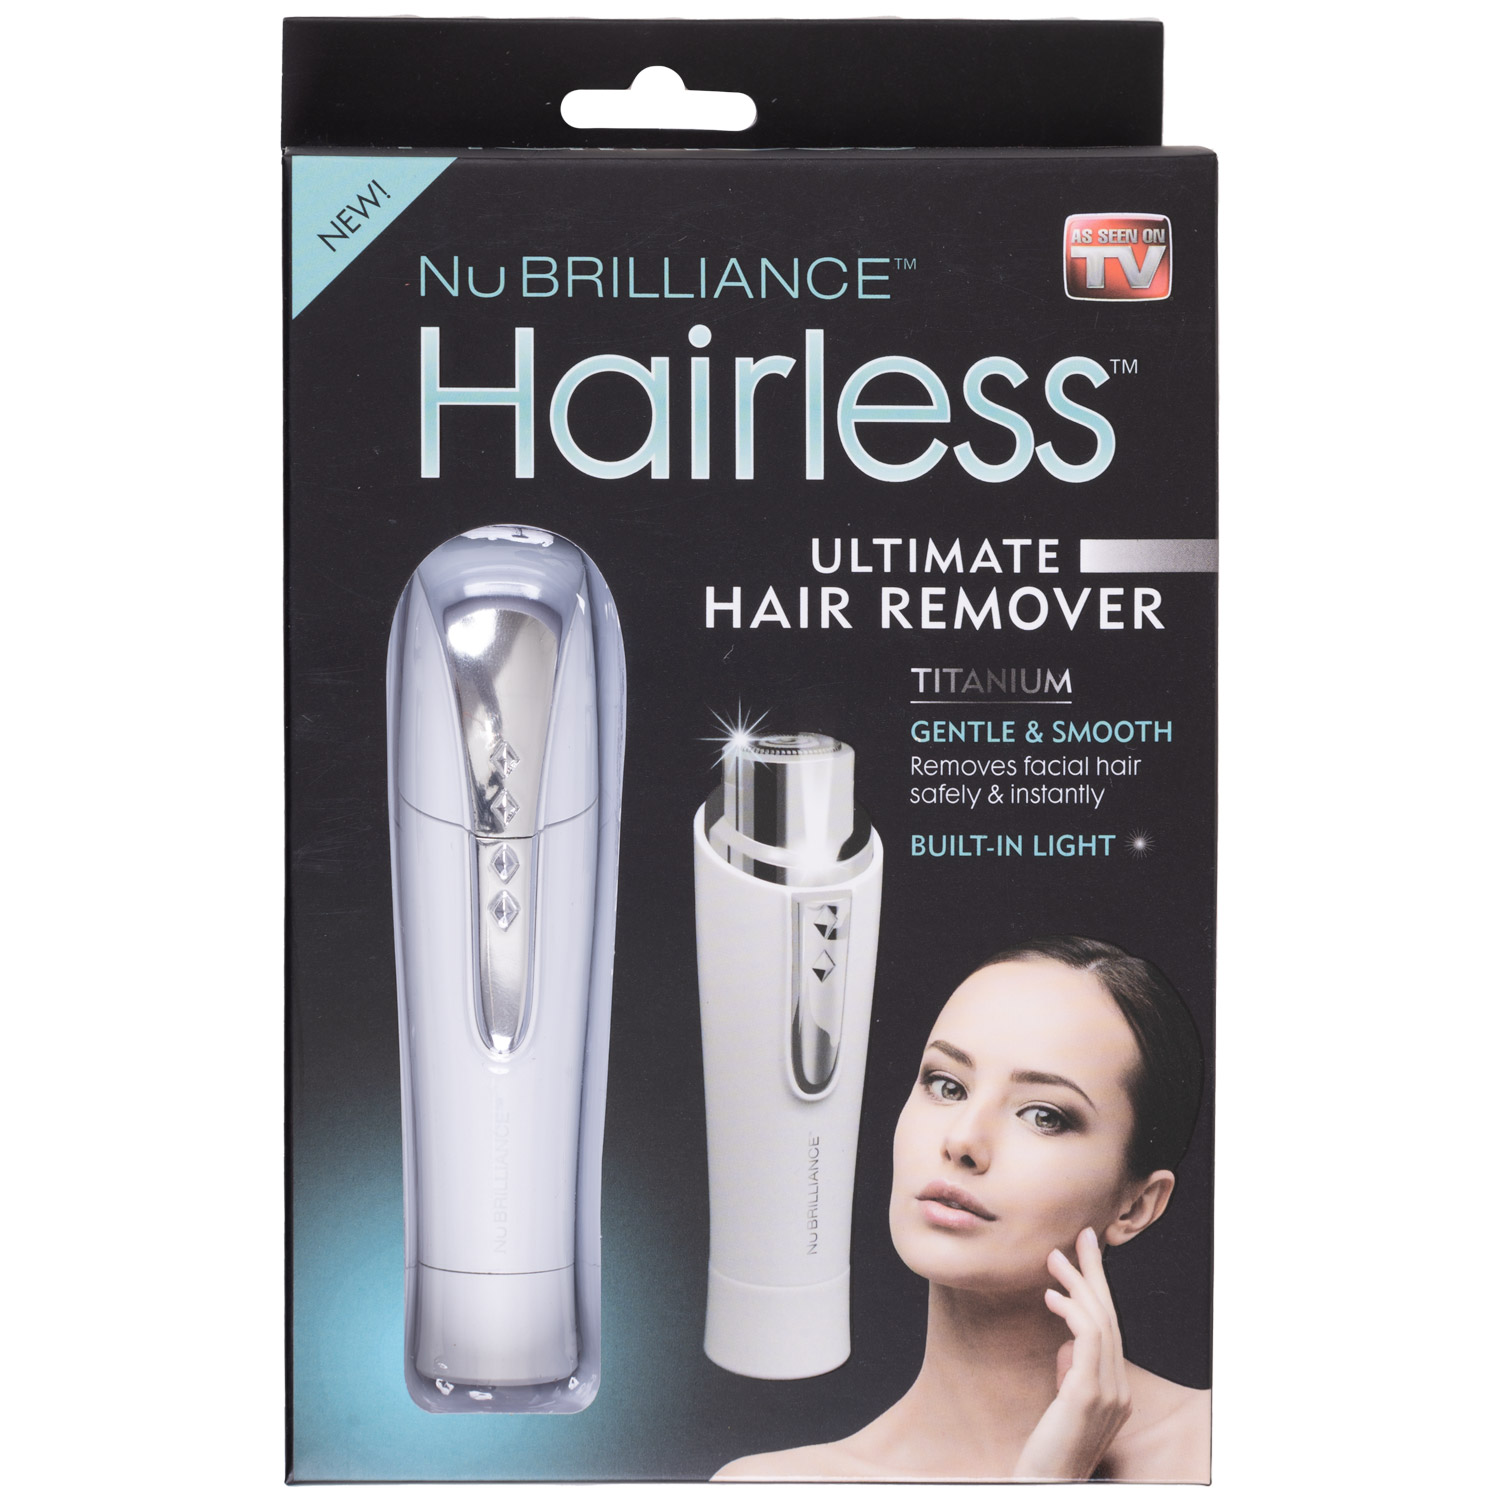 https://www.rossy.ca/media/A2W/products/nubrilliance-hairless-ultimate-cordless-hair-remover-59780-1.jpg